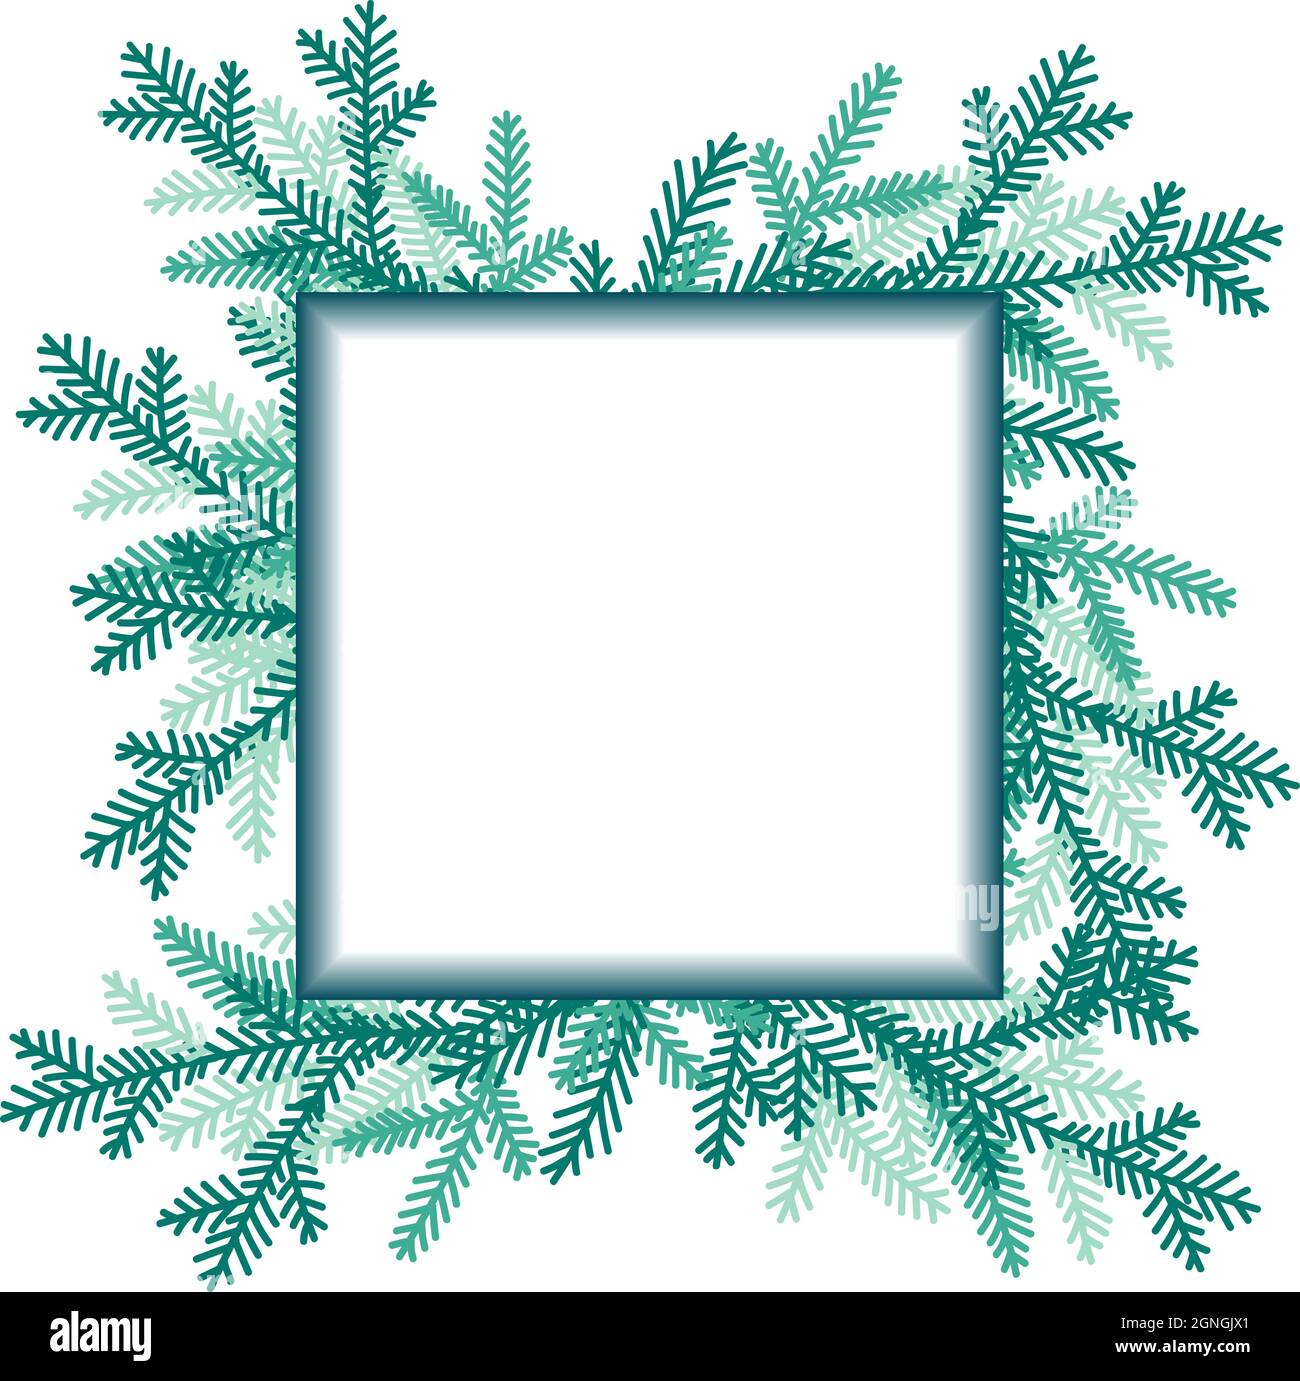 Square frame with fir branches for new year or christmas greetings in flat style. Stock Vector